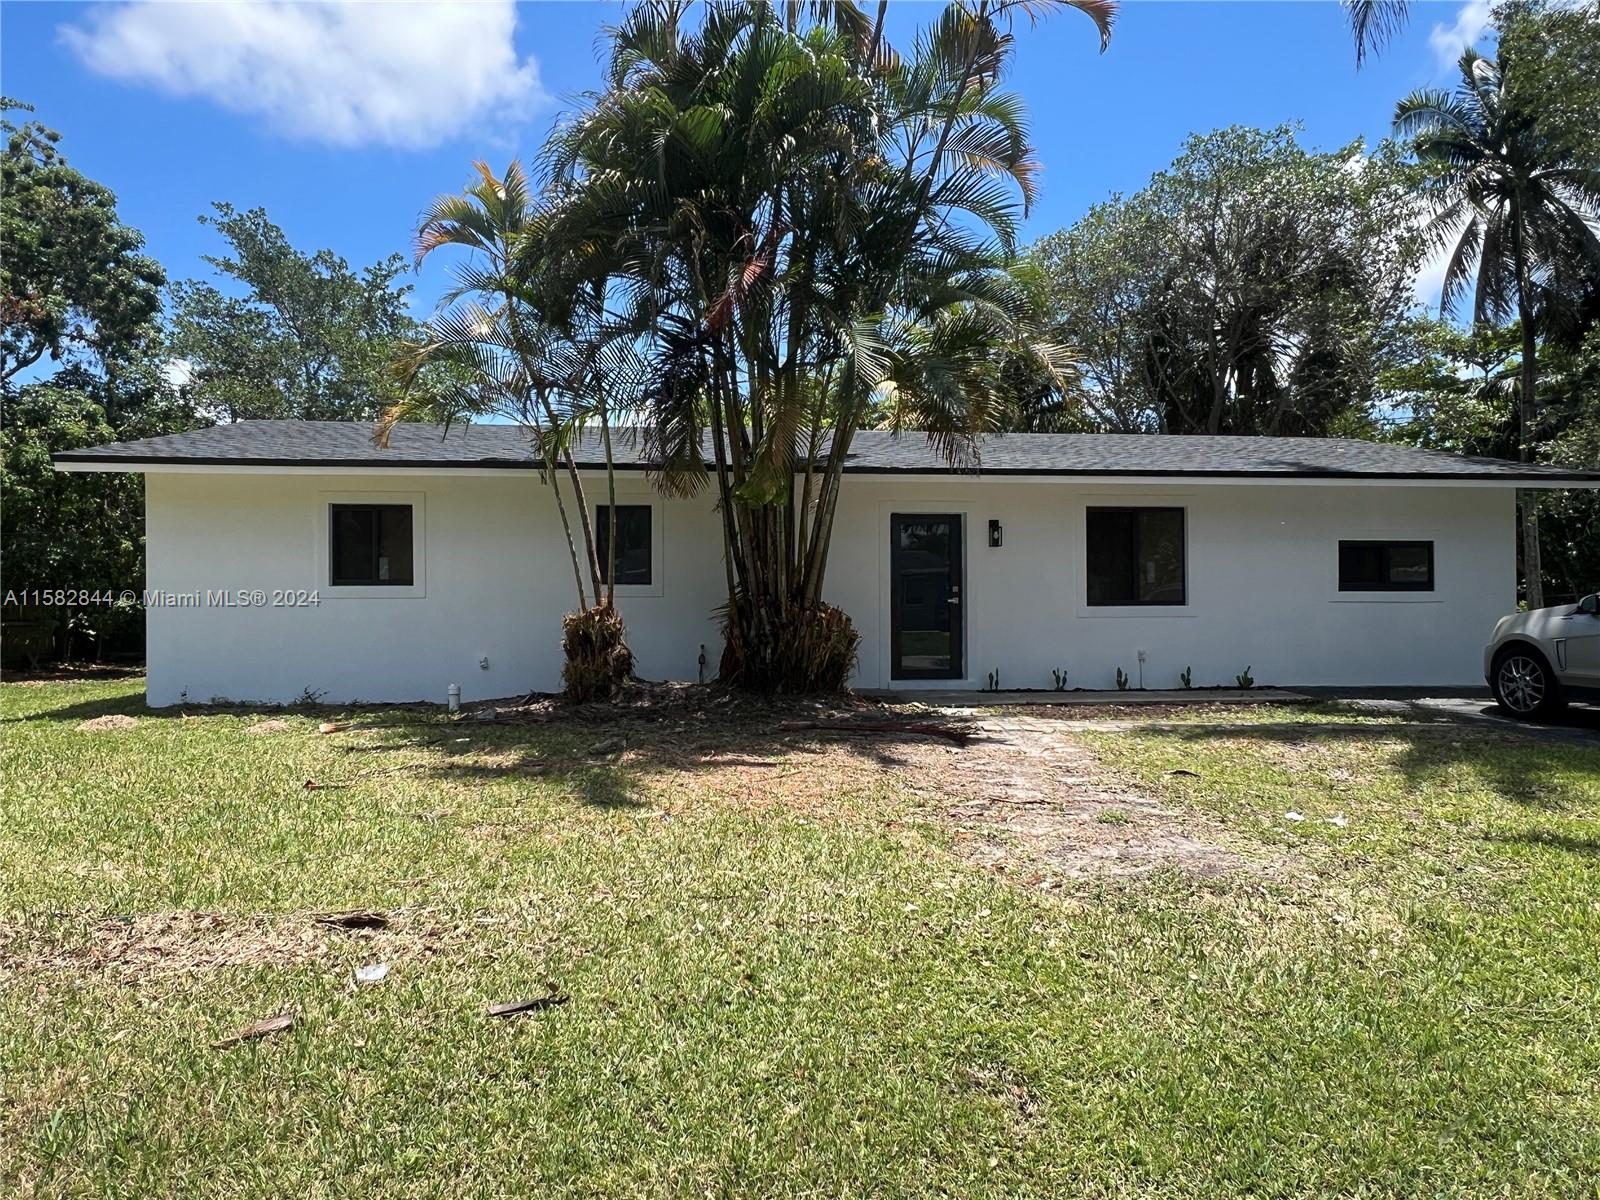 Property for Sale at Address Not Disclosed, Fort Lauderdale, Broward County, Florida - Bedrooms: 3 
Bathrooms: 2  - $568,900